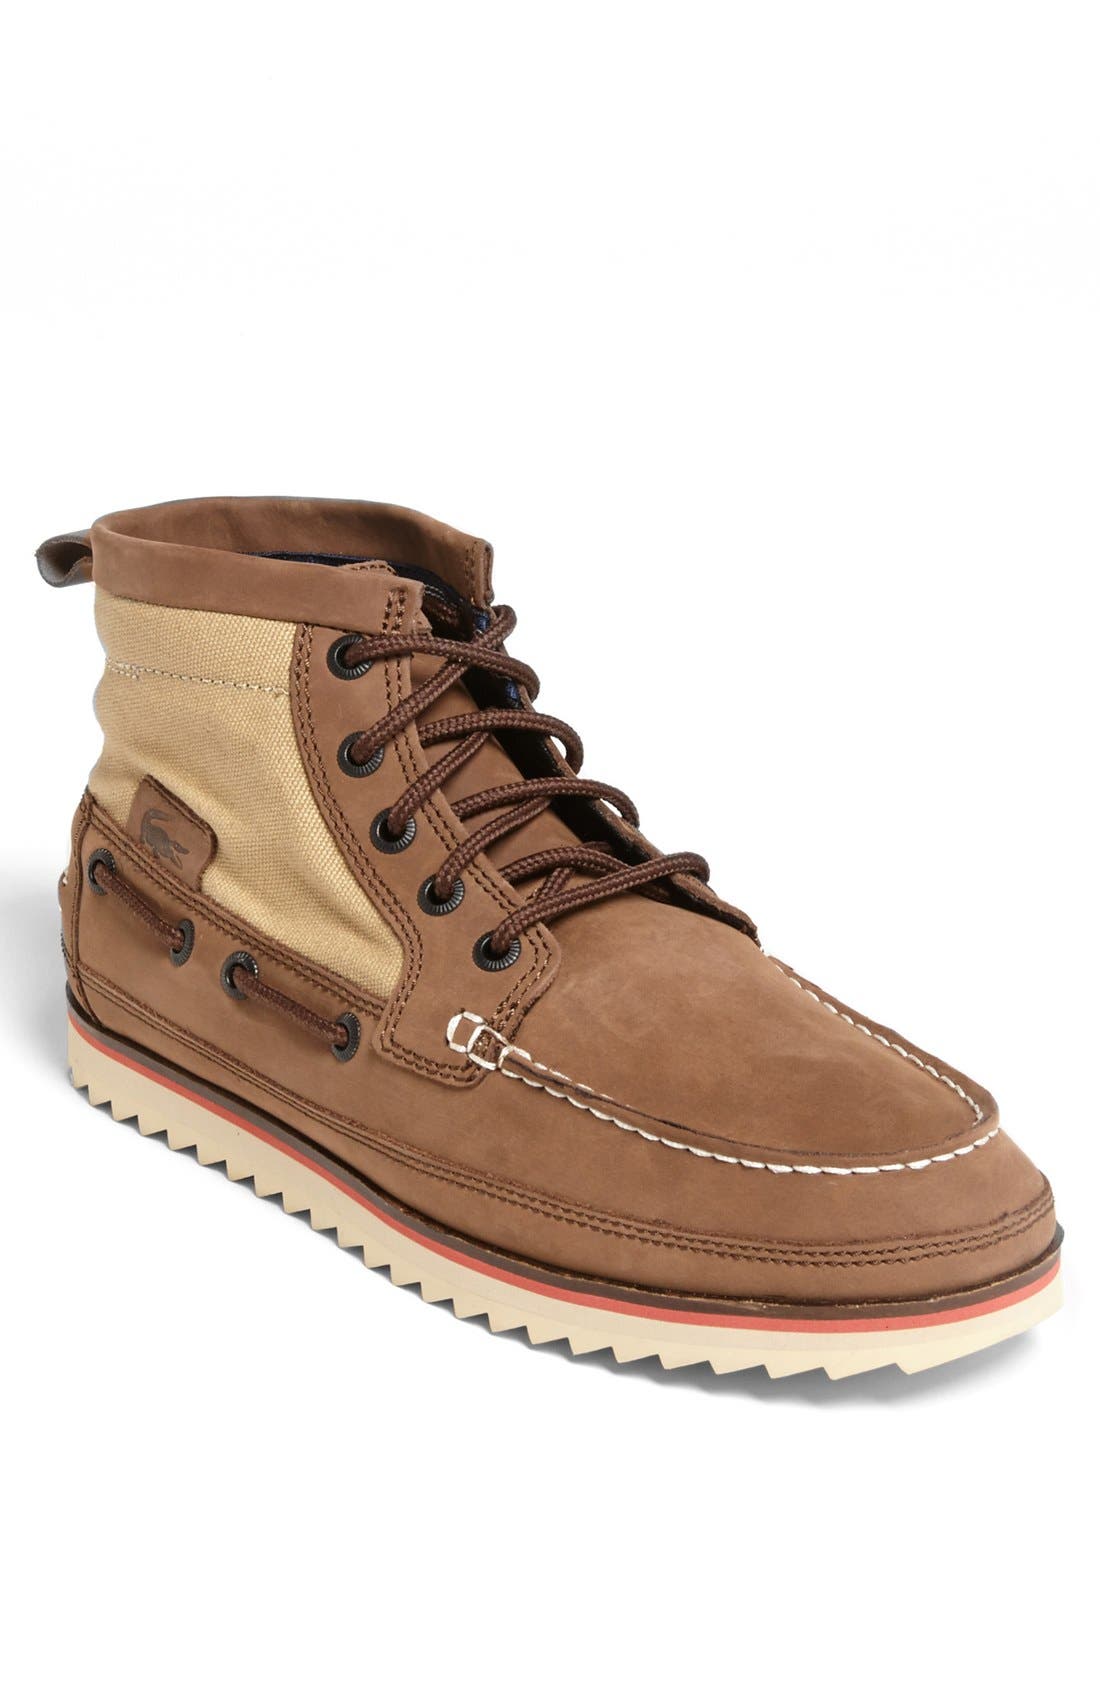 Lacoste 'Sauville' Moc Toe Boot | Nordstrom